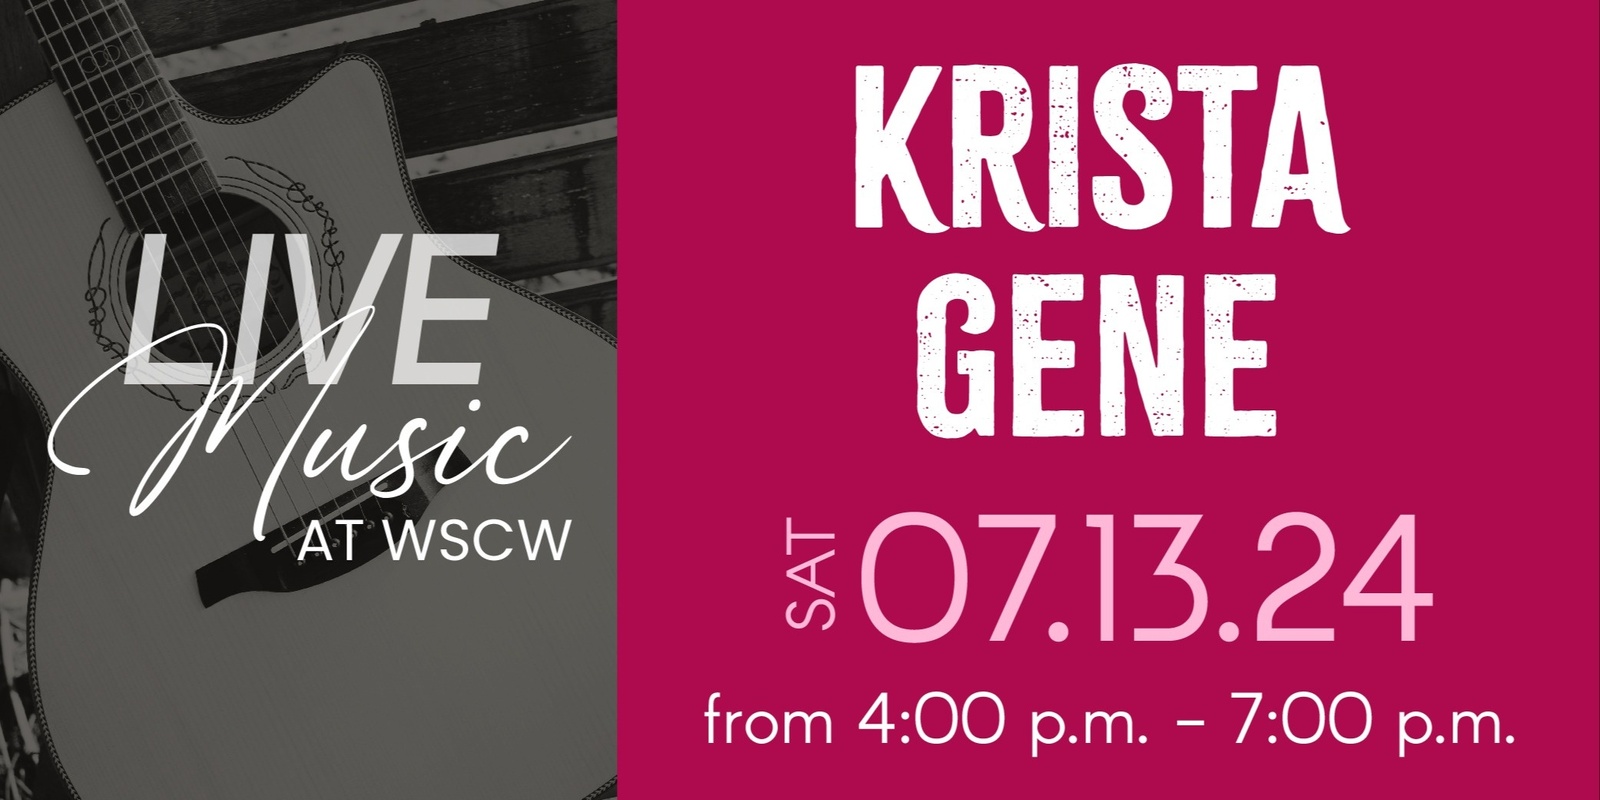 Banner image for Krista Gene Live at WSCW July 13